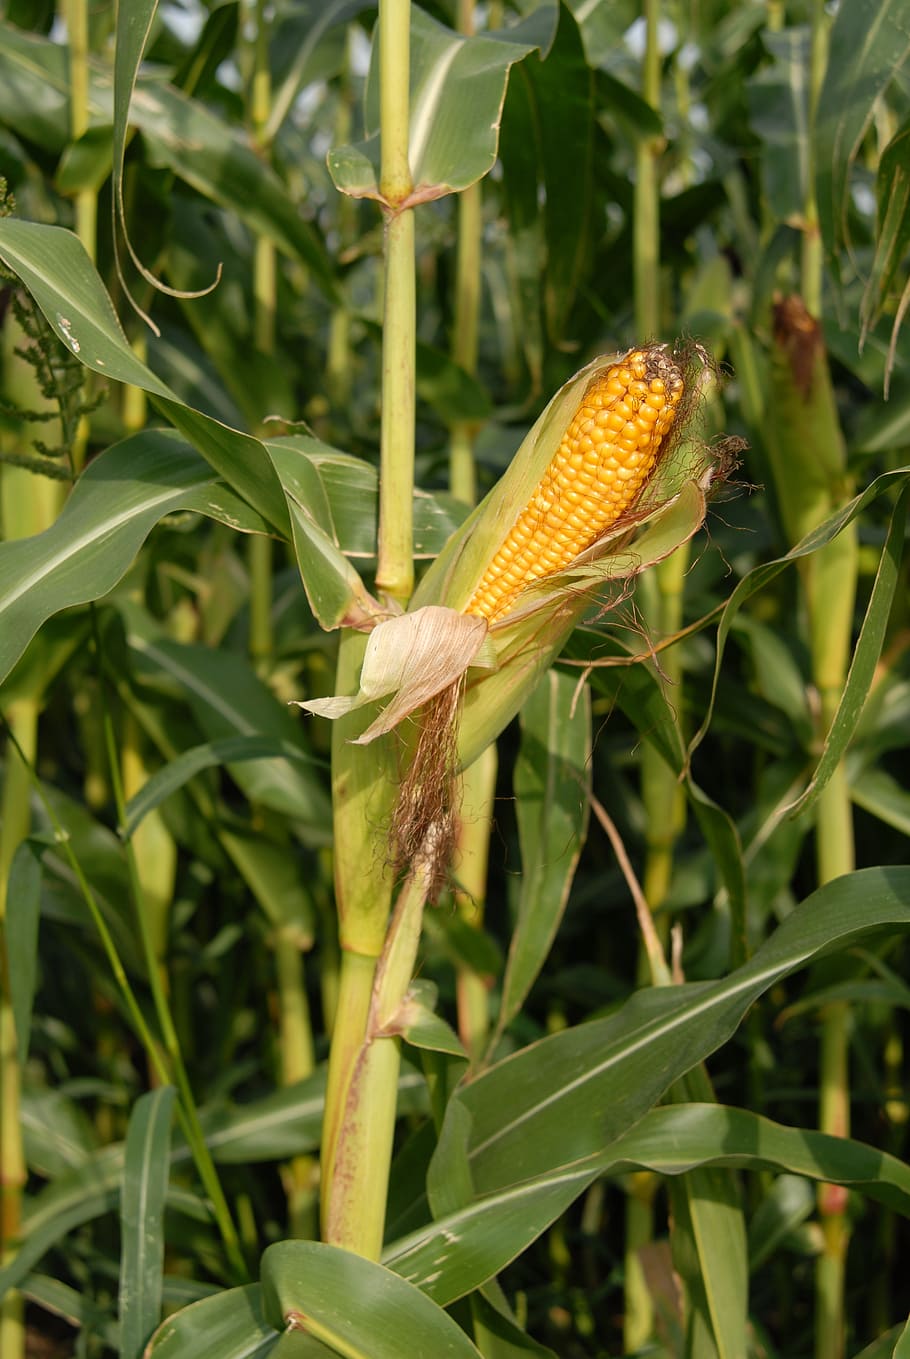 corn on the cob, corn, cereals, plant, growth, green color, day, close-up, nature, focus on foreground